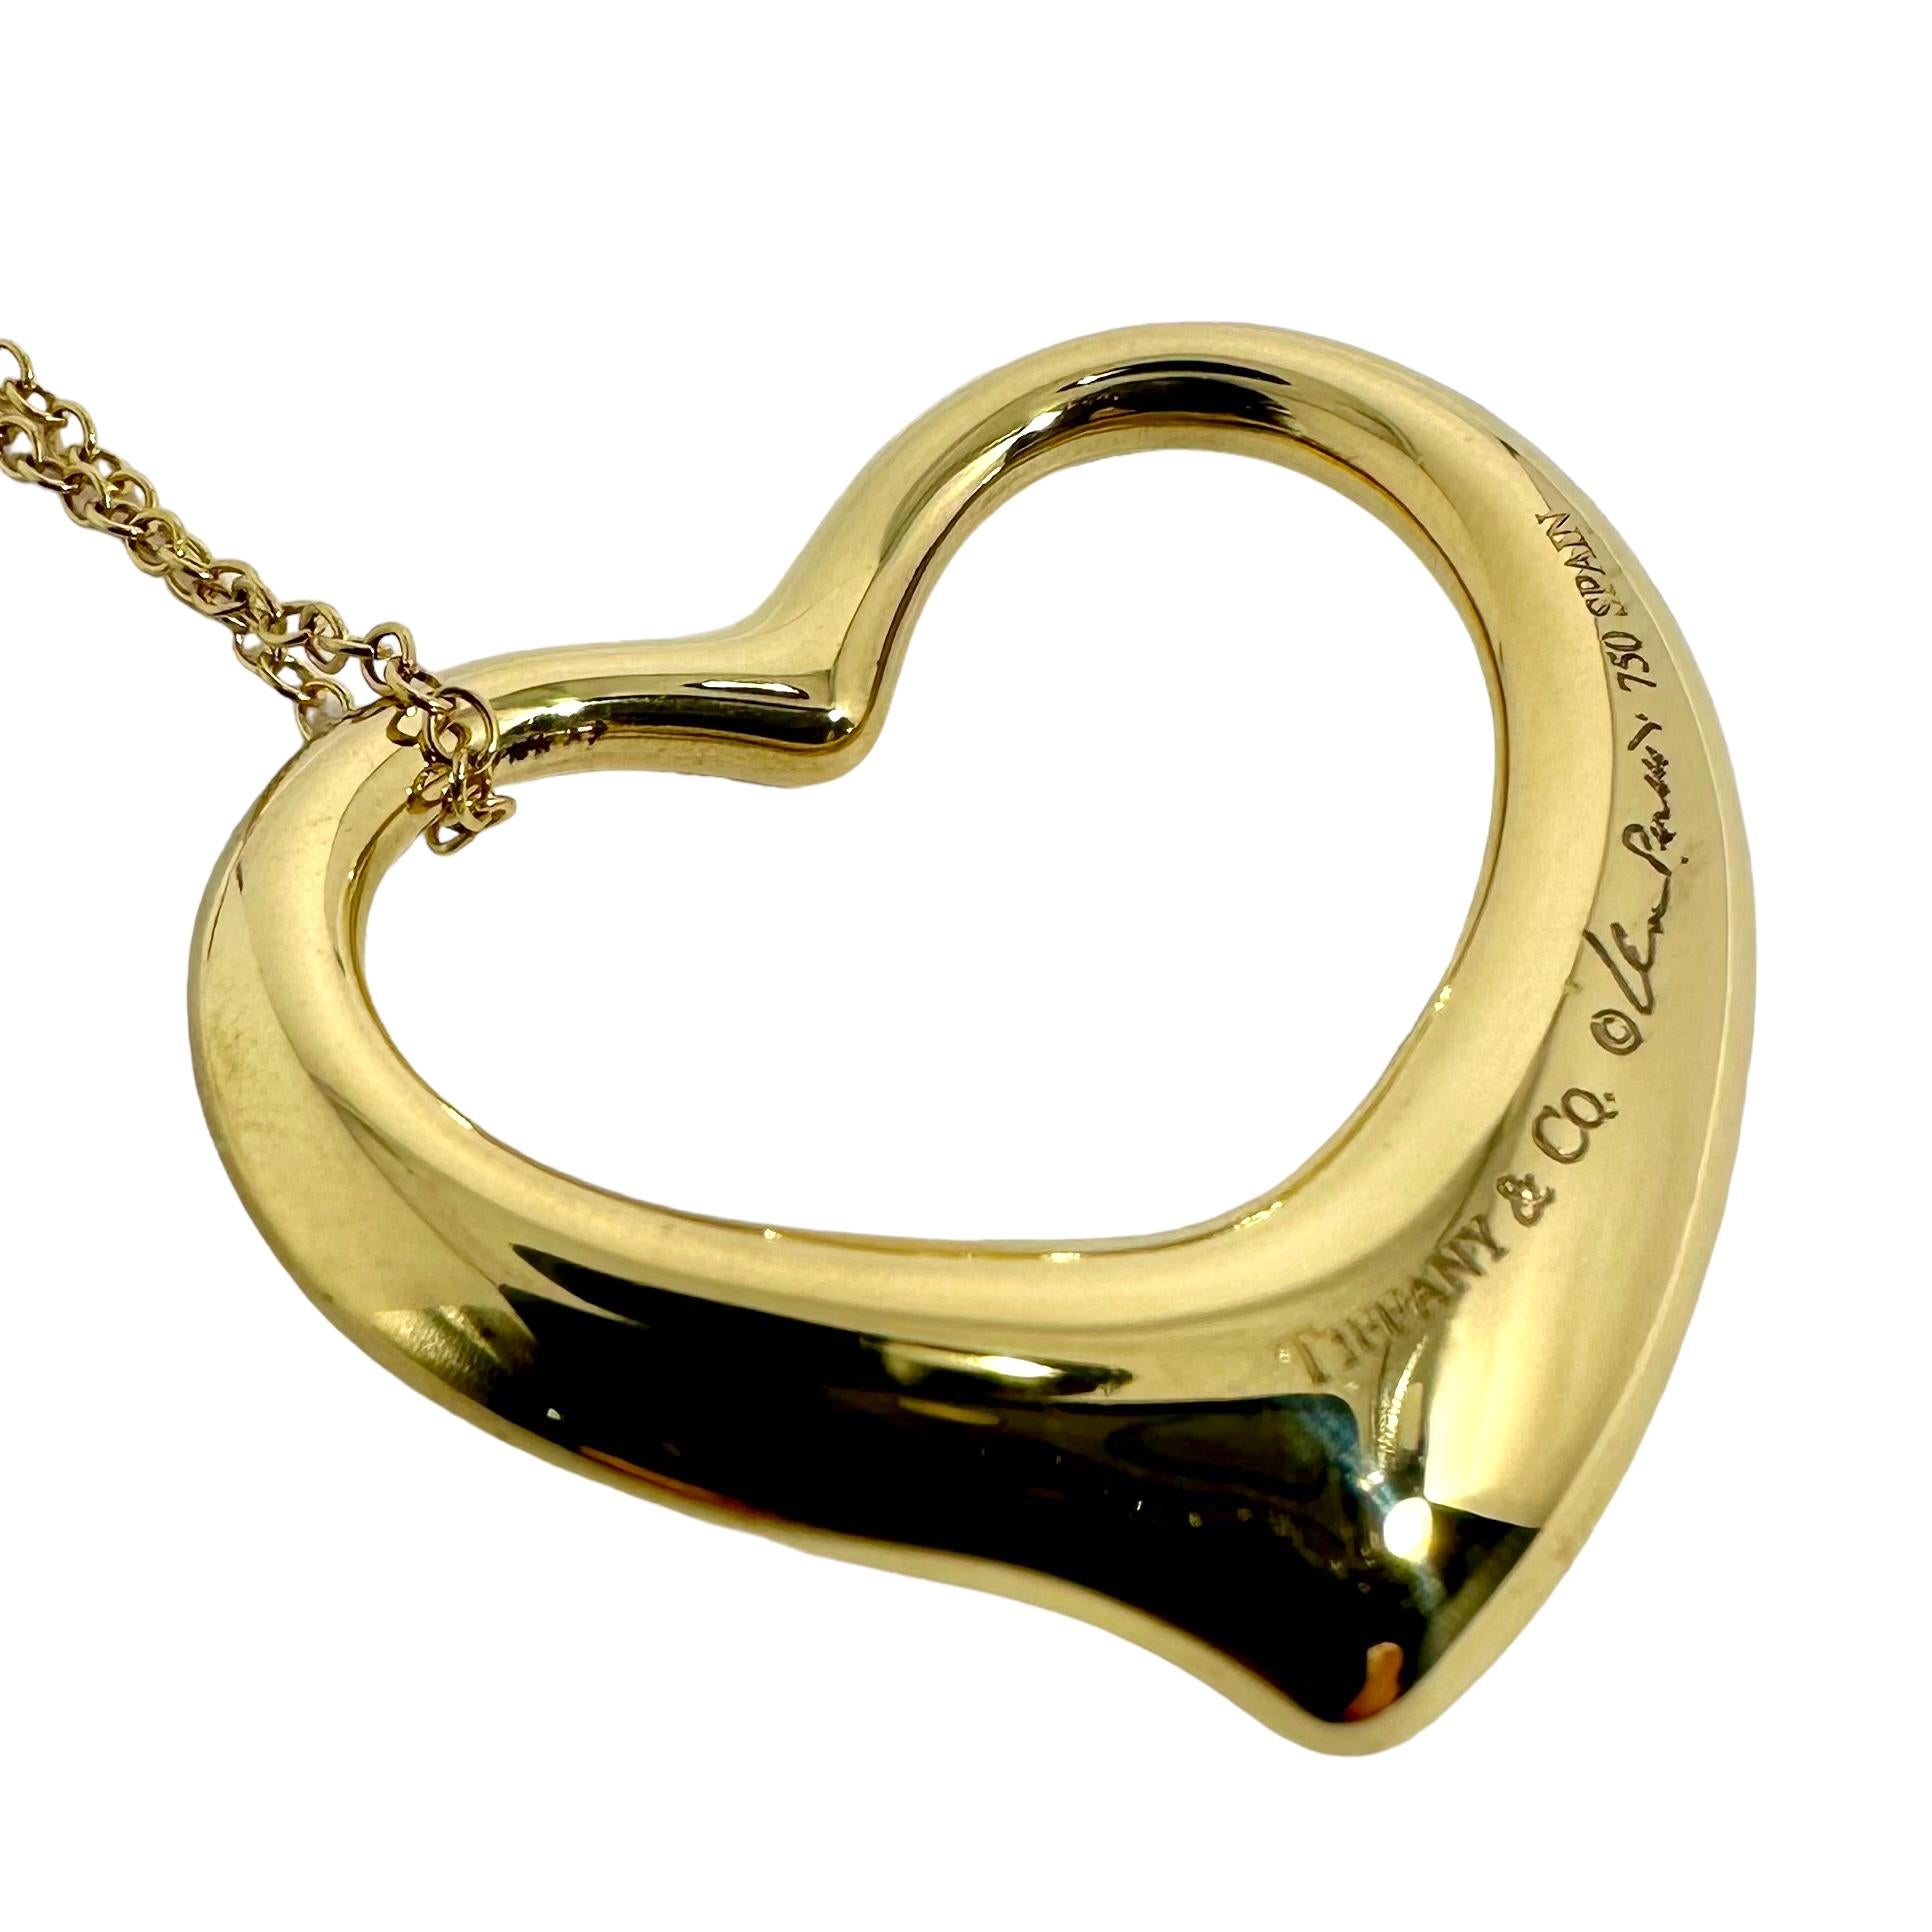 This wonderful vintage Tiffany & Co. Elsa Peretti large open heart pendant on 30 inch Tiffany & Co. Elsa Peretti neck chain is a real icon of this venerated house's pendants. It is offered for sale in it's original Tiffany & Co box. This particular